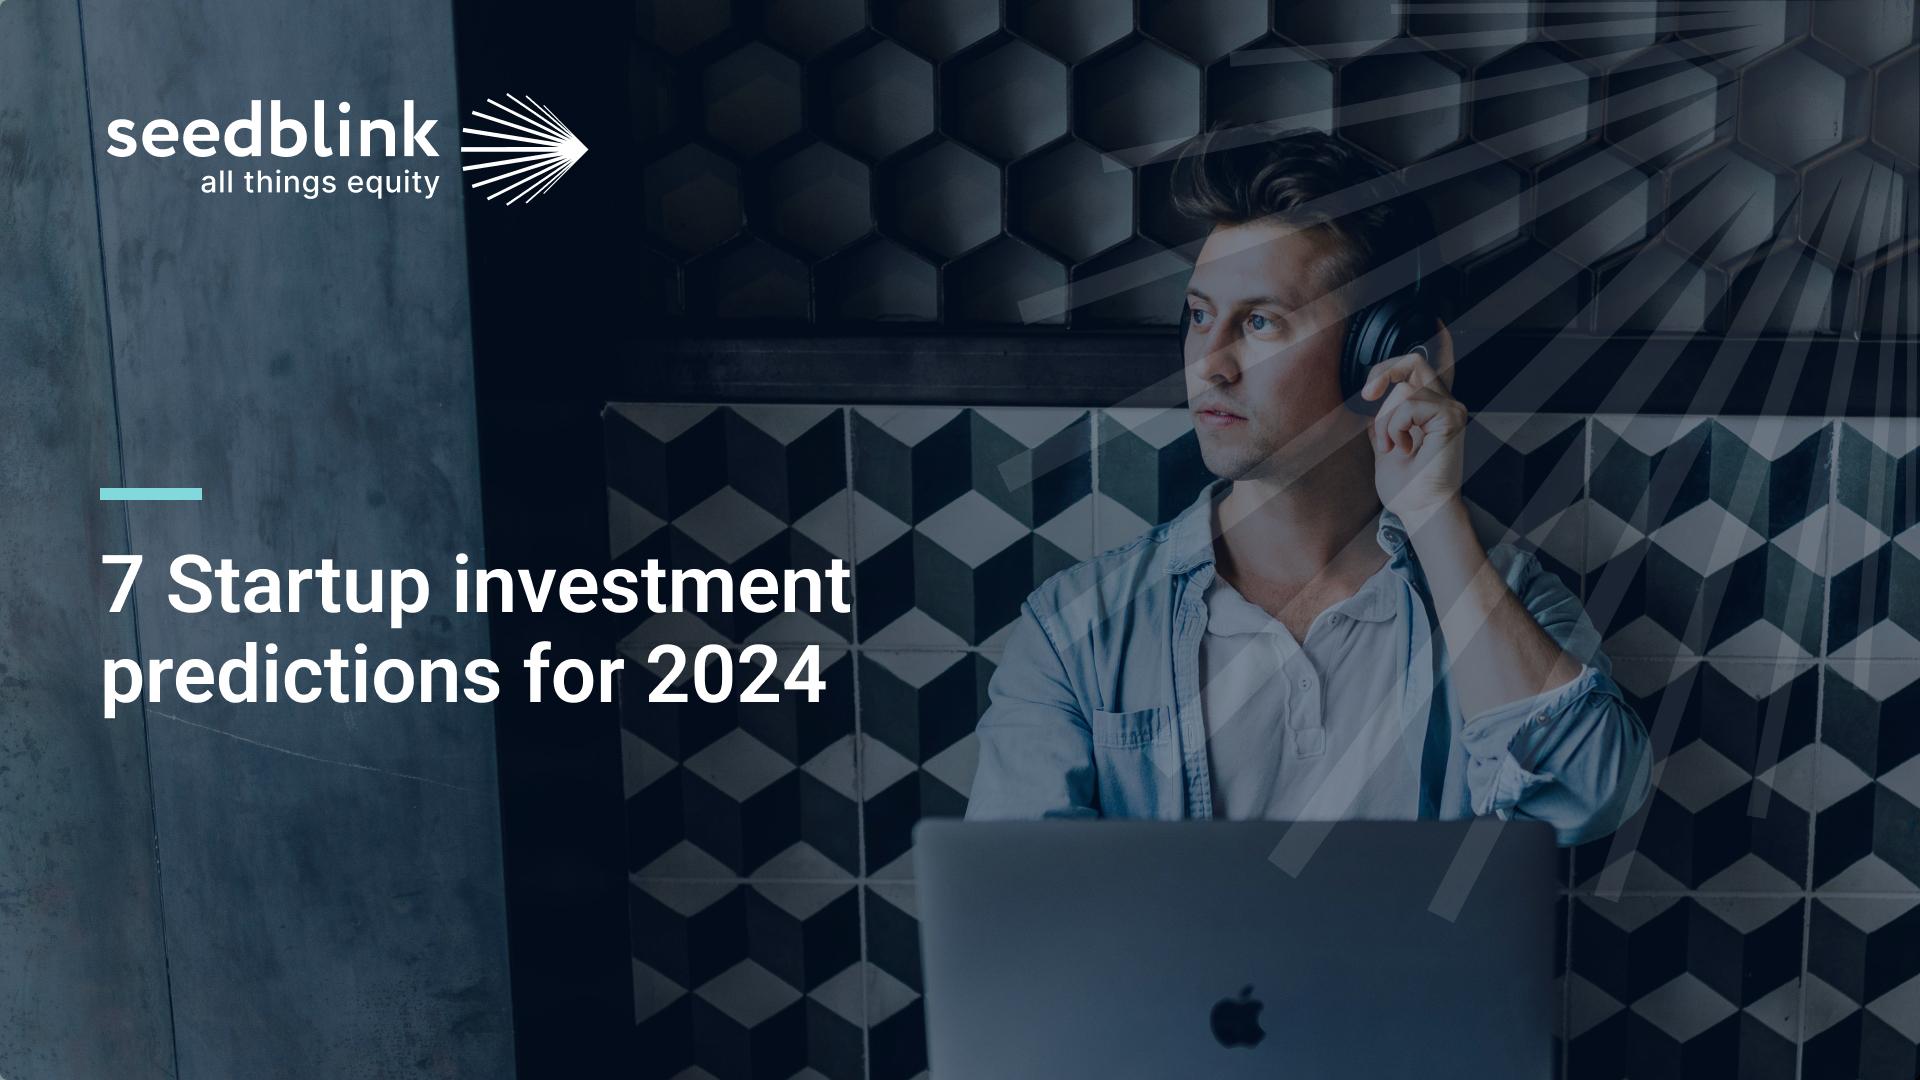 7 startup investment predictions for 2024